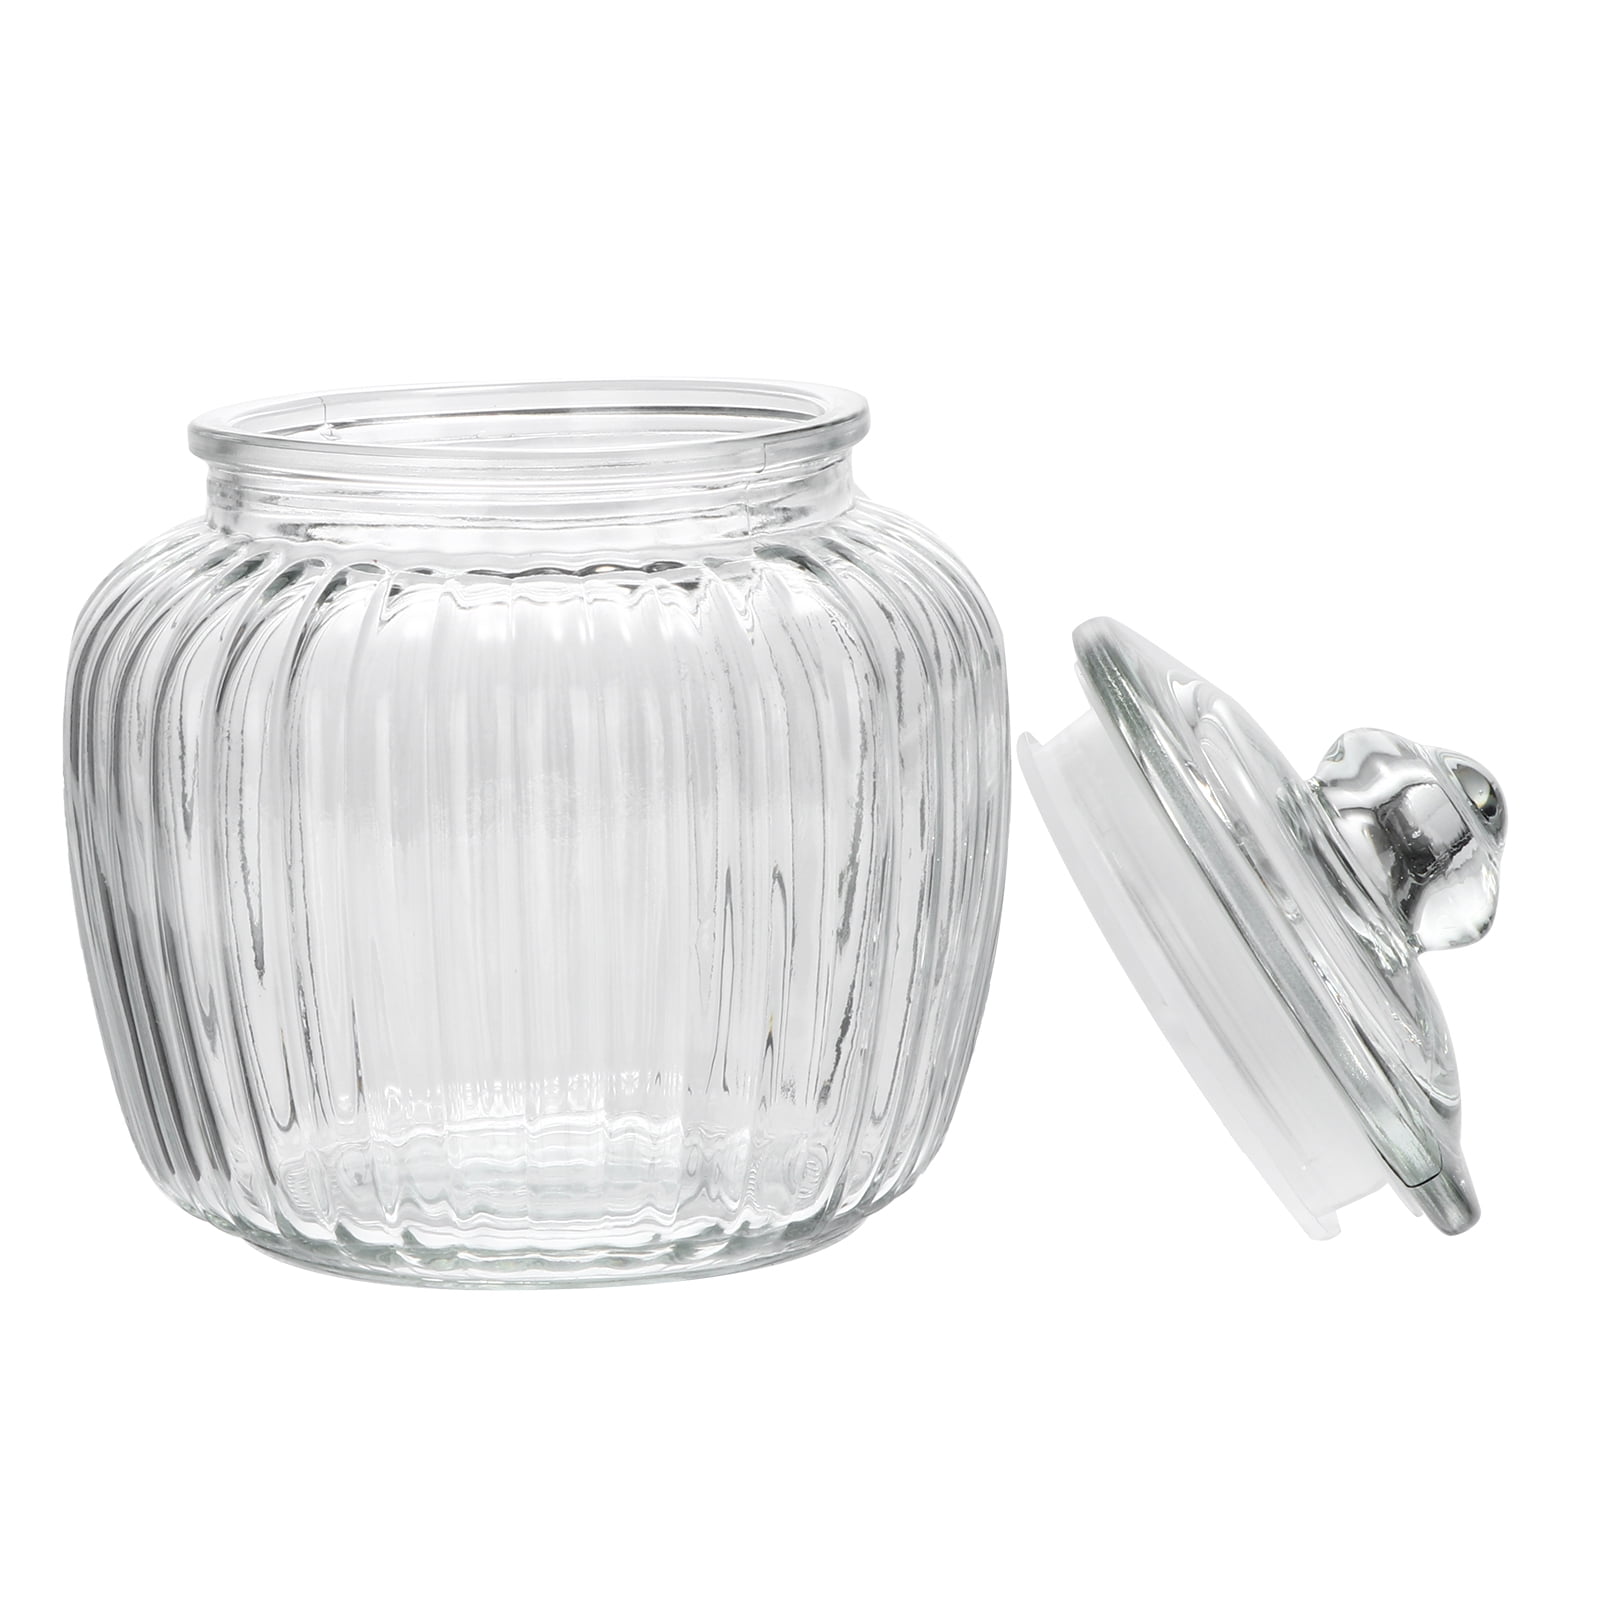 CAGSIG Candy jars with lids